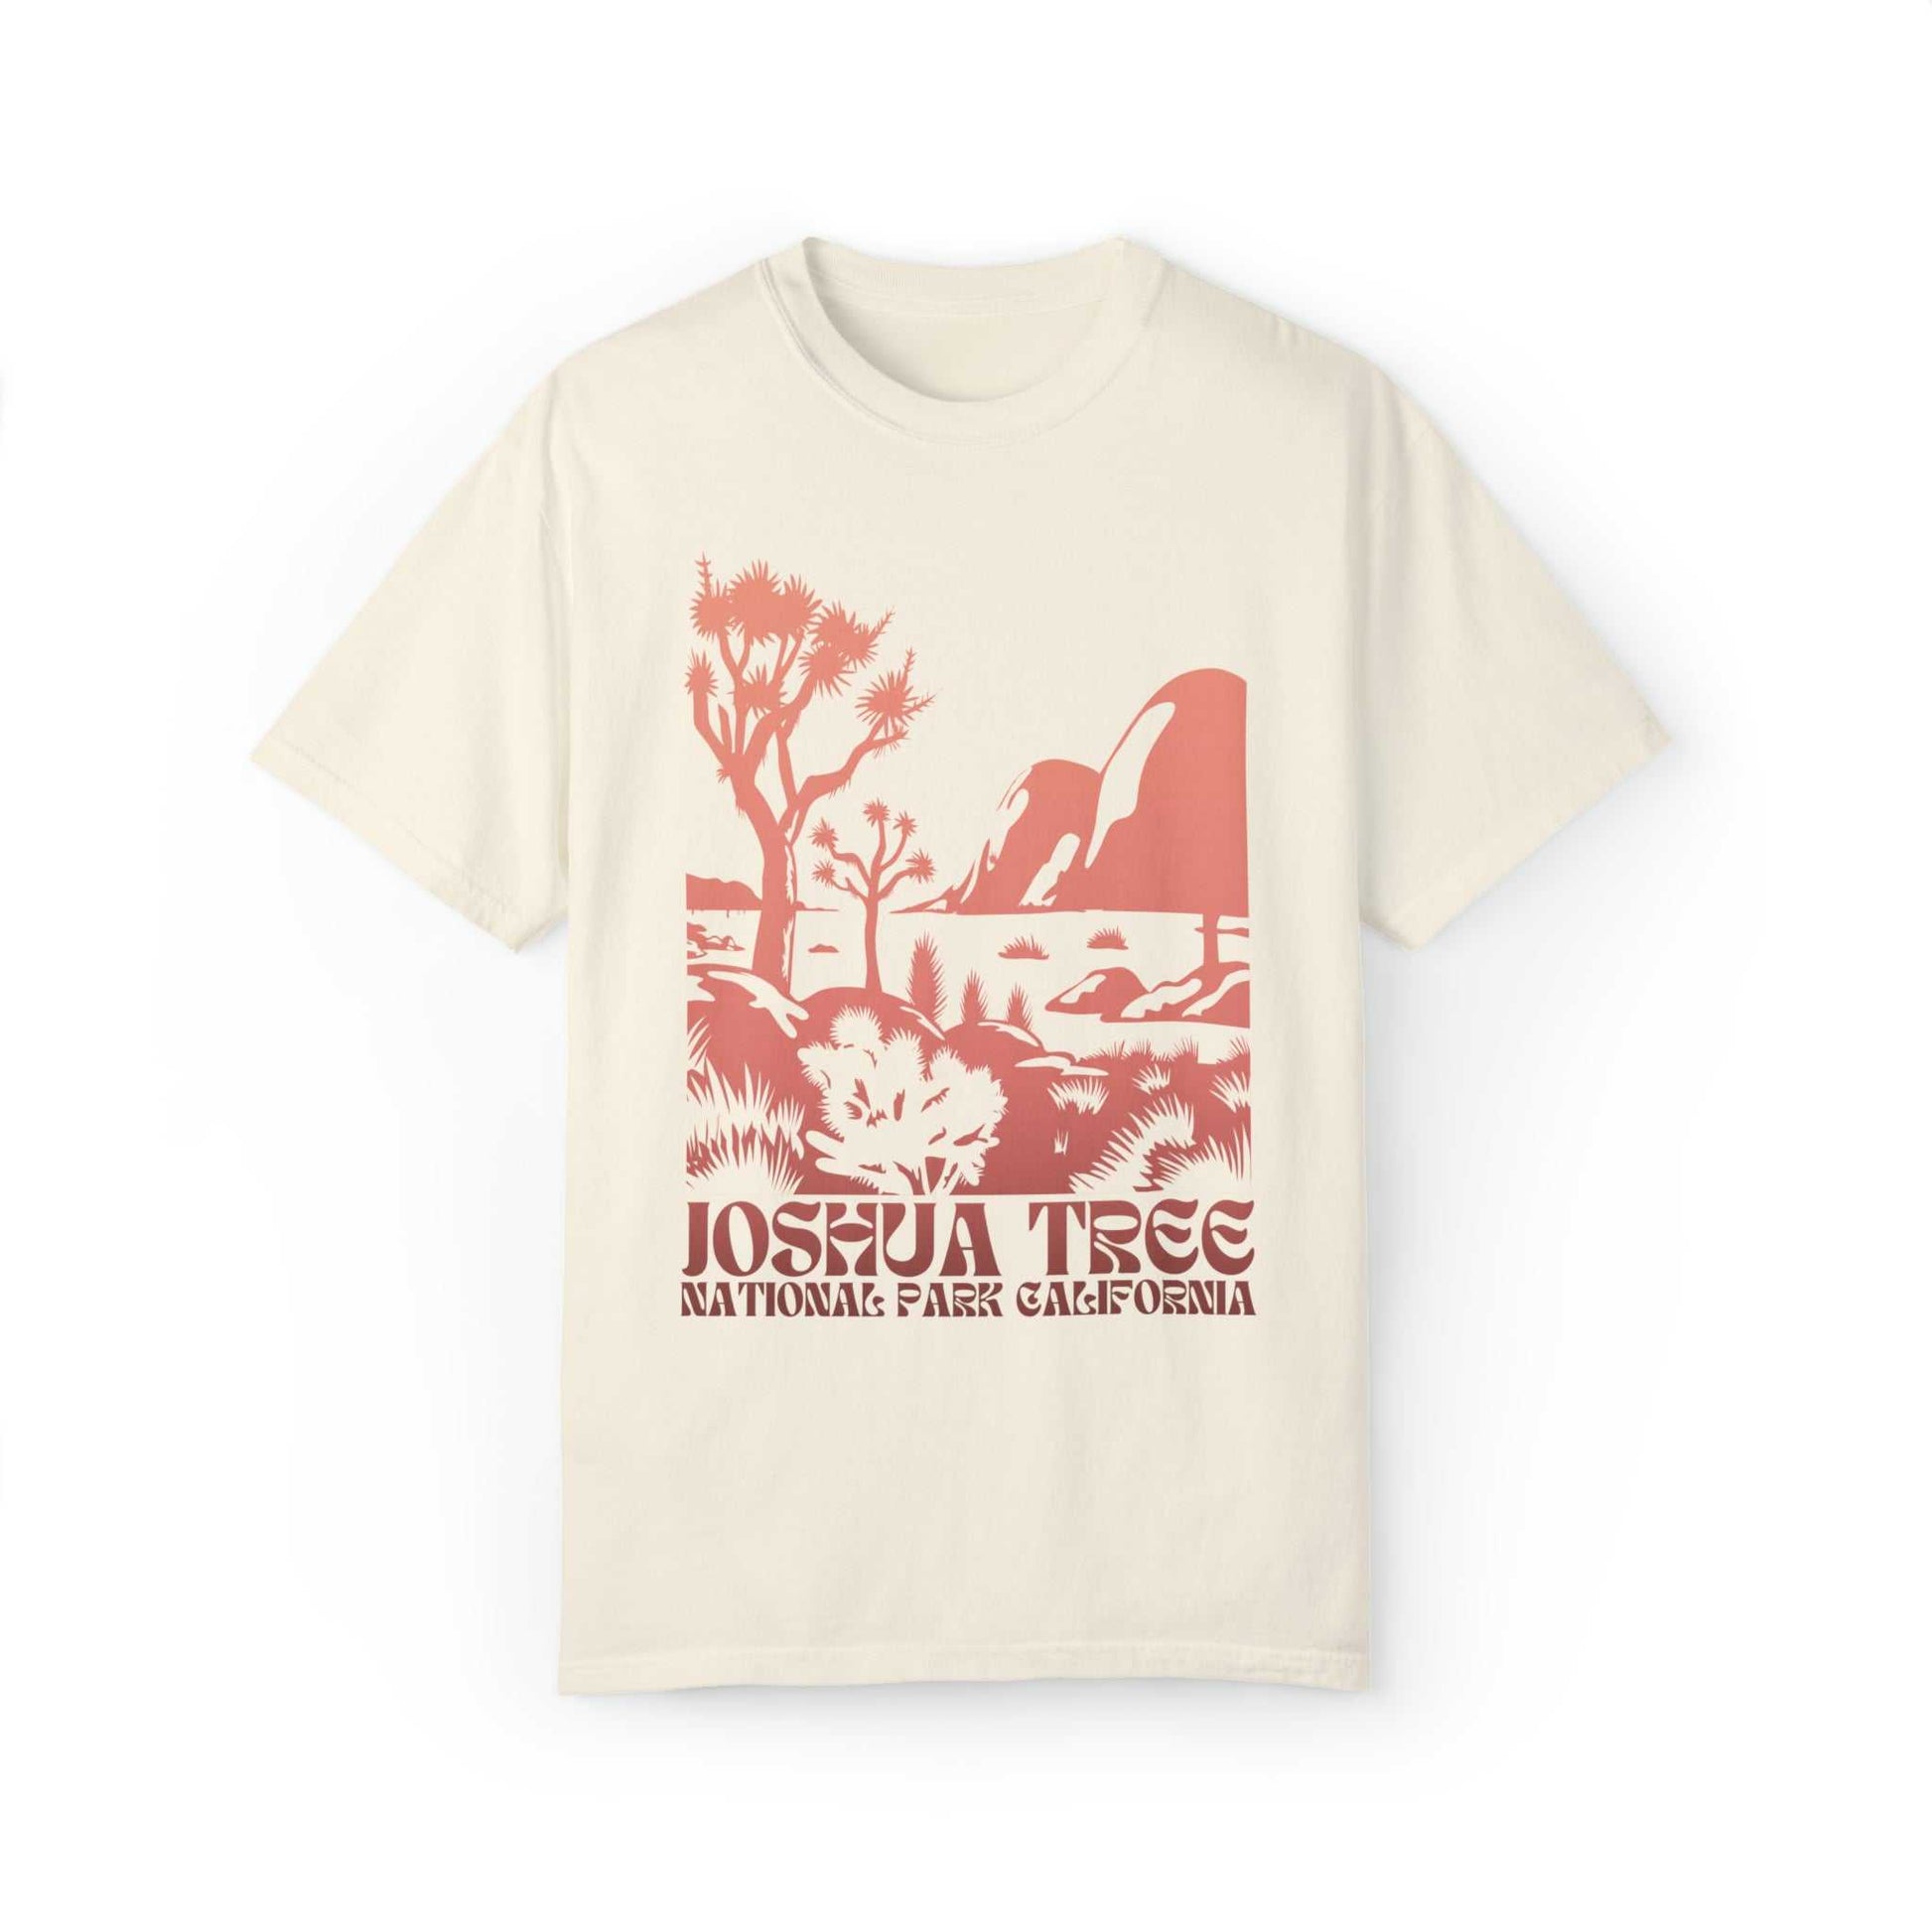 Joshua Tree National Park ShirtBring back the vibe on your next outdoor outing with this 90s vintage styled Joshua Tree National Park Graphic Tee.
- mid-weight cotton fabric - garment dyed for a v